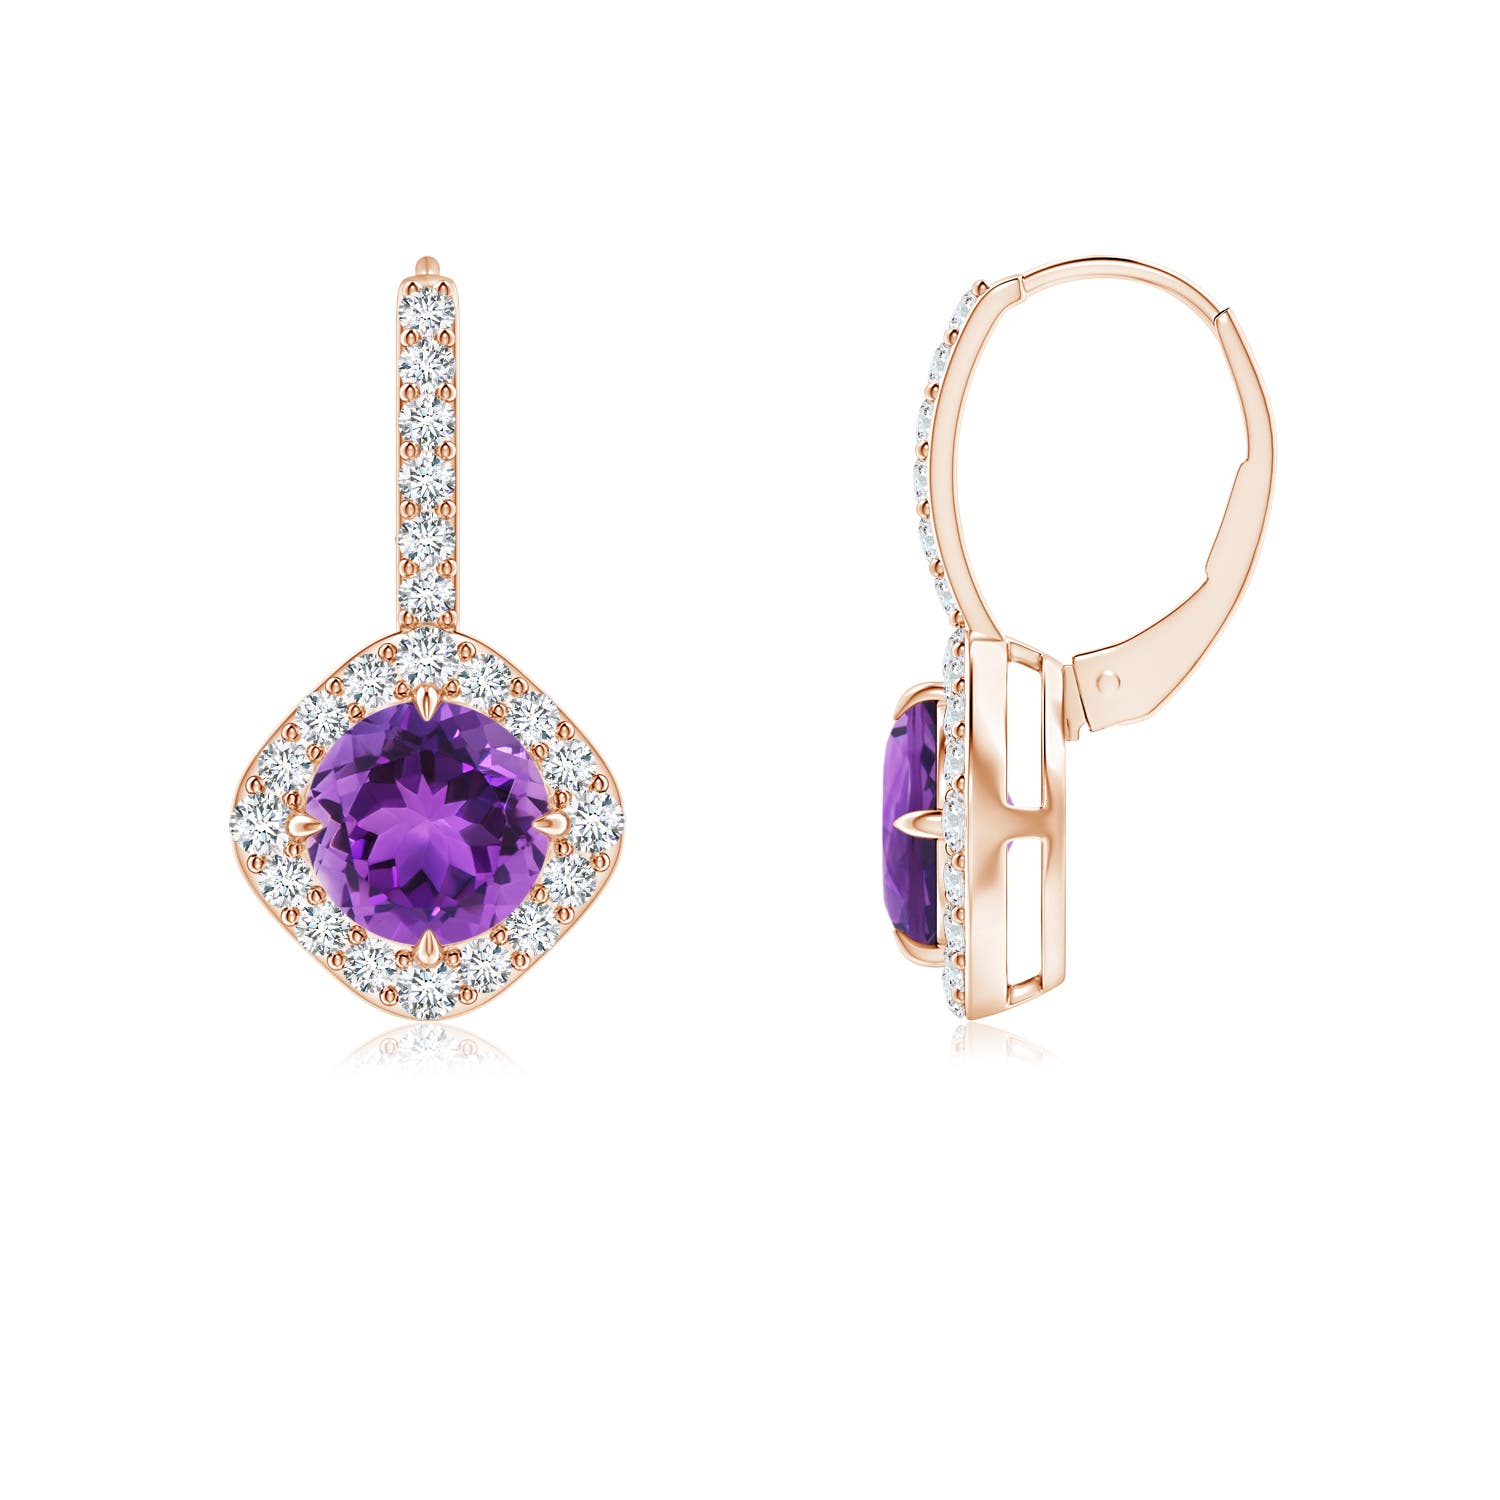 AAA - Amethyst / 1.98 CT / 14 KT Rose Gold